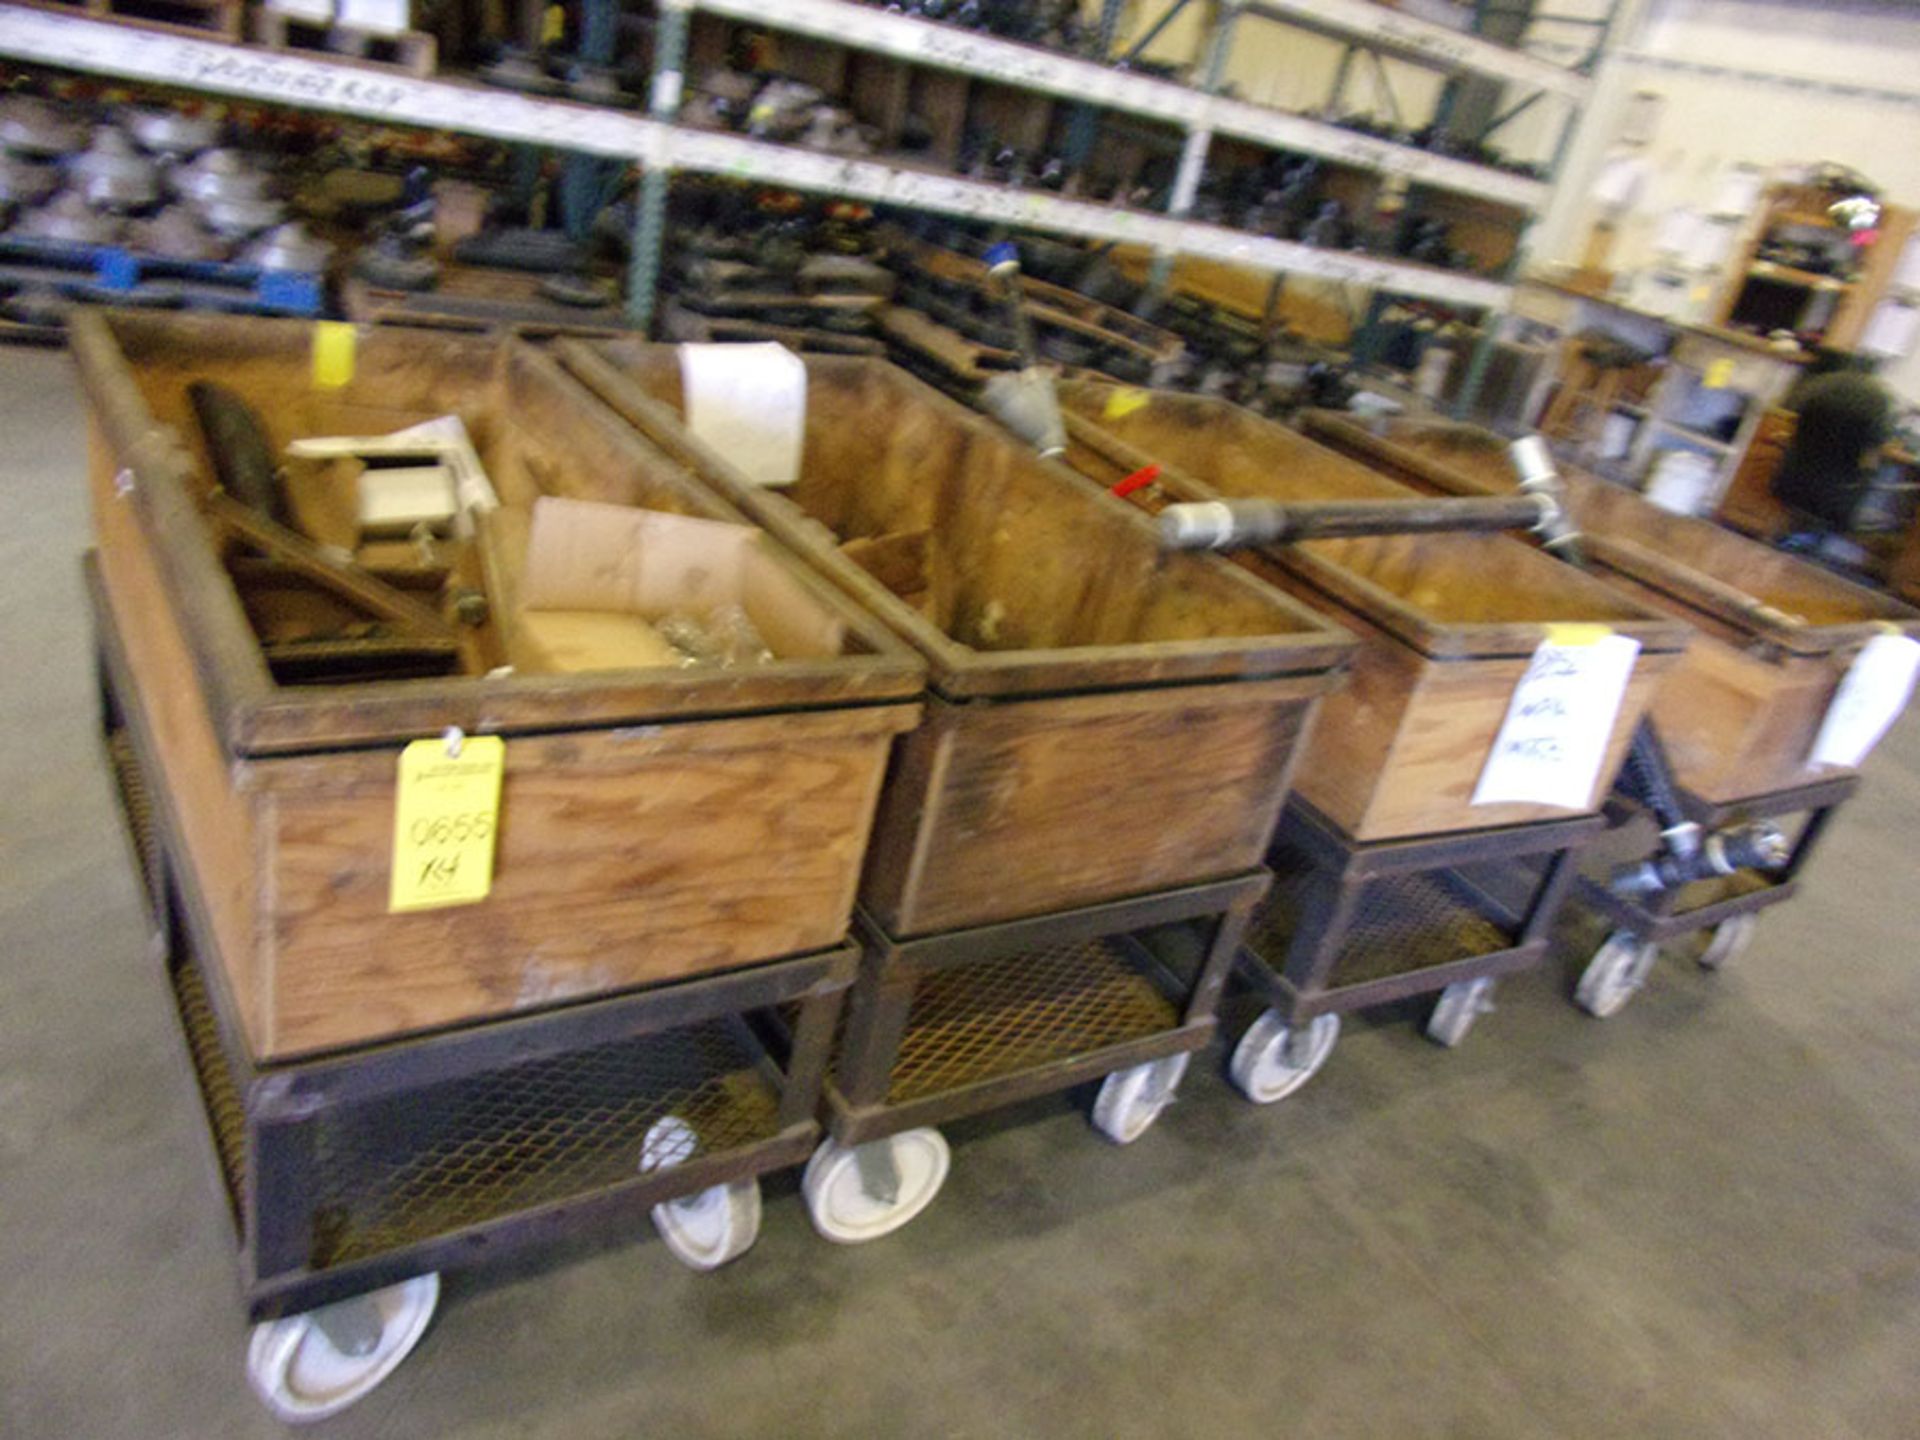 ROLLING STOCK CARTS WITH CONTENTS; WASHERS & BOLTS (X4)